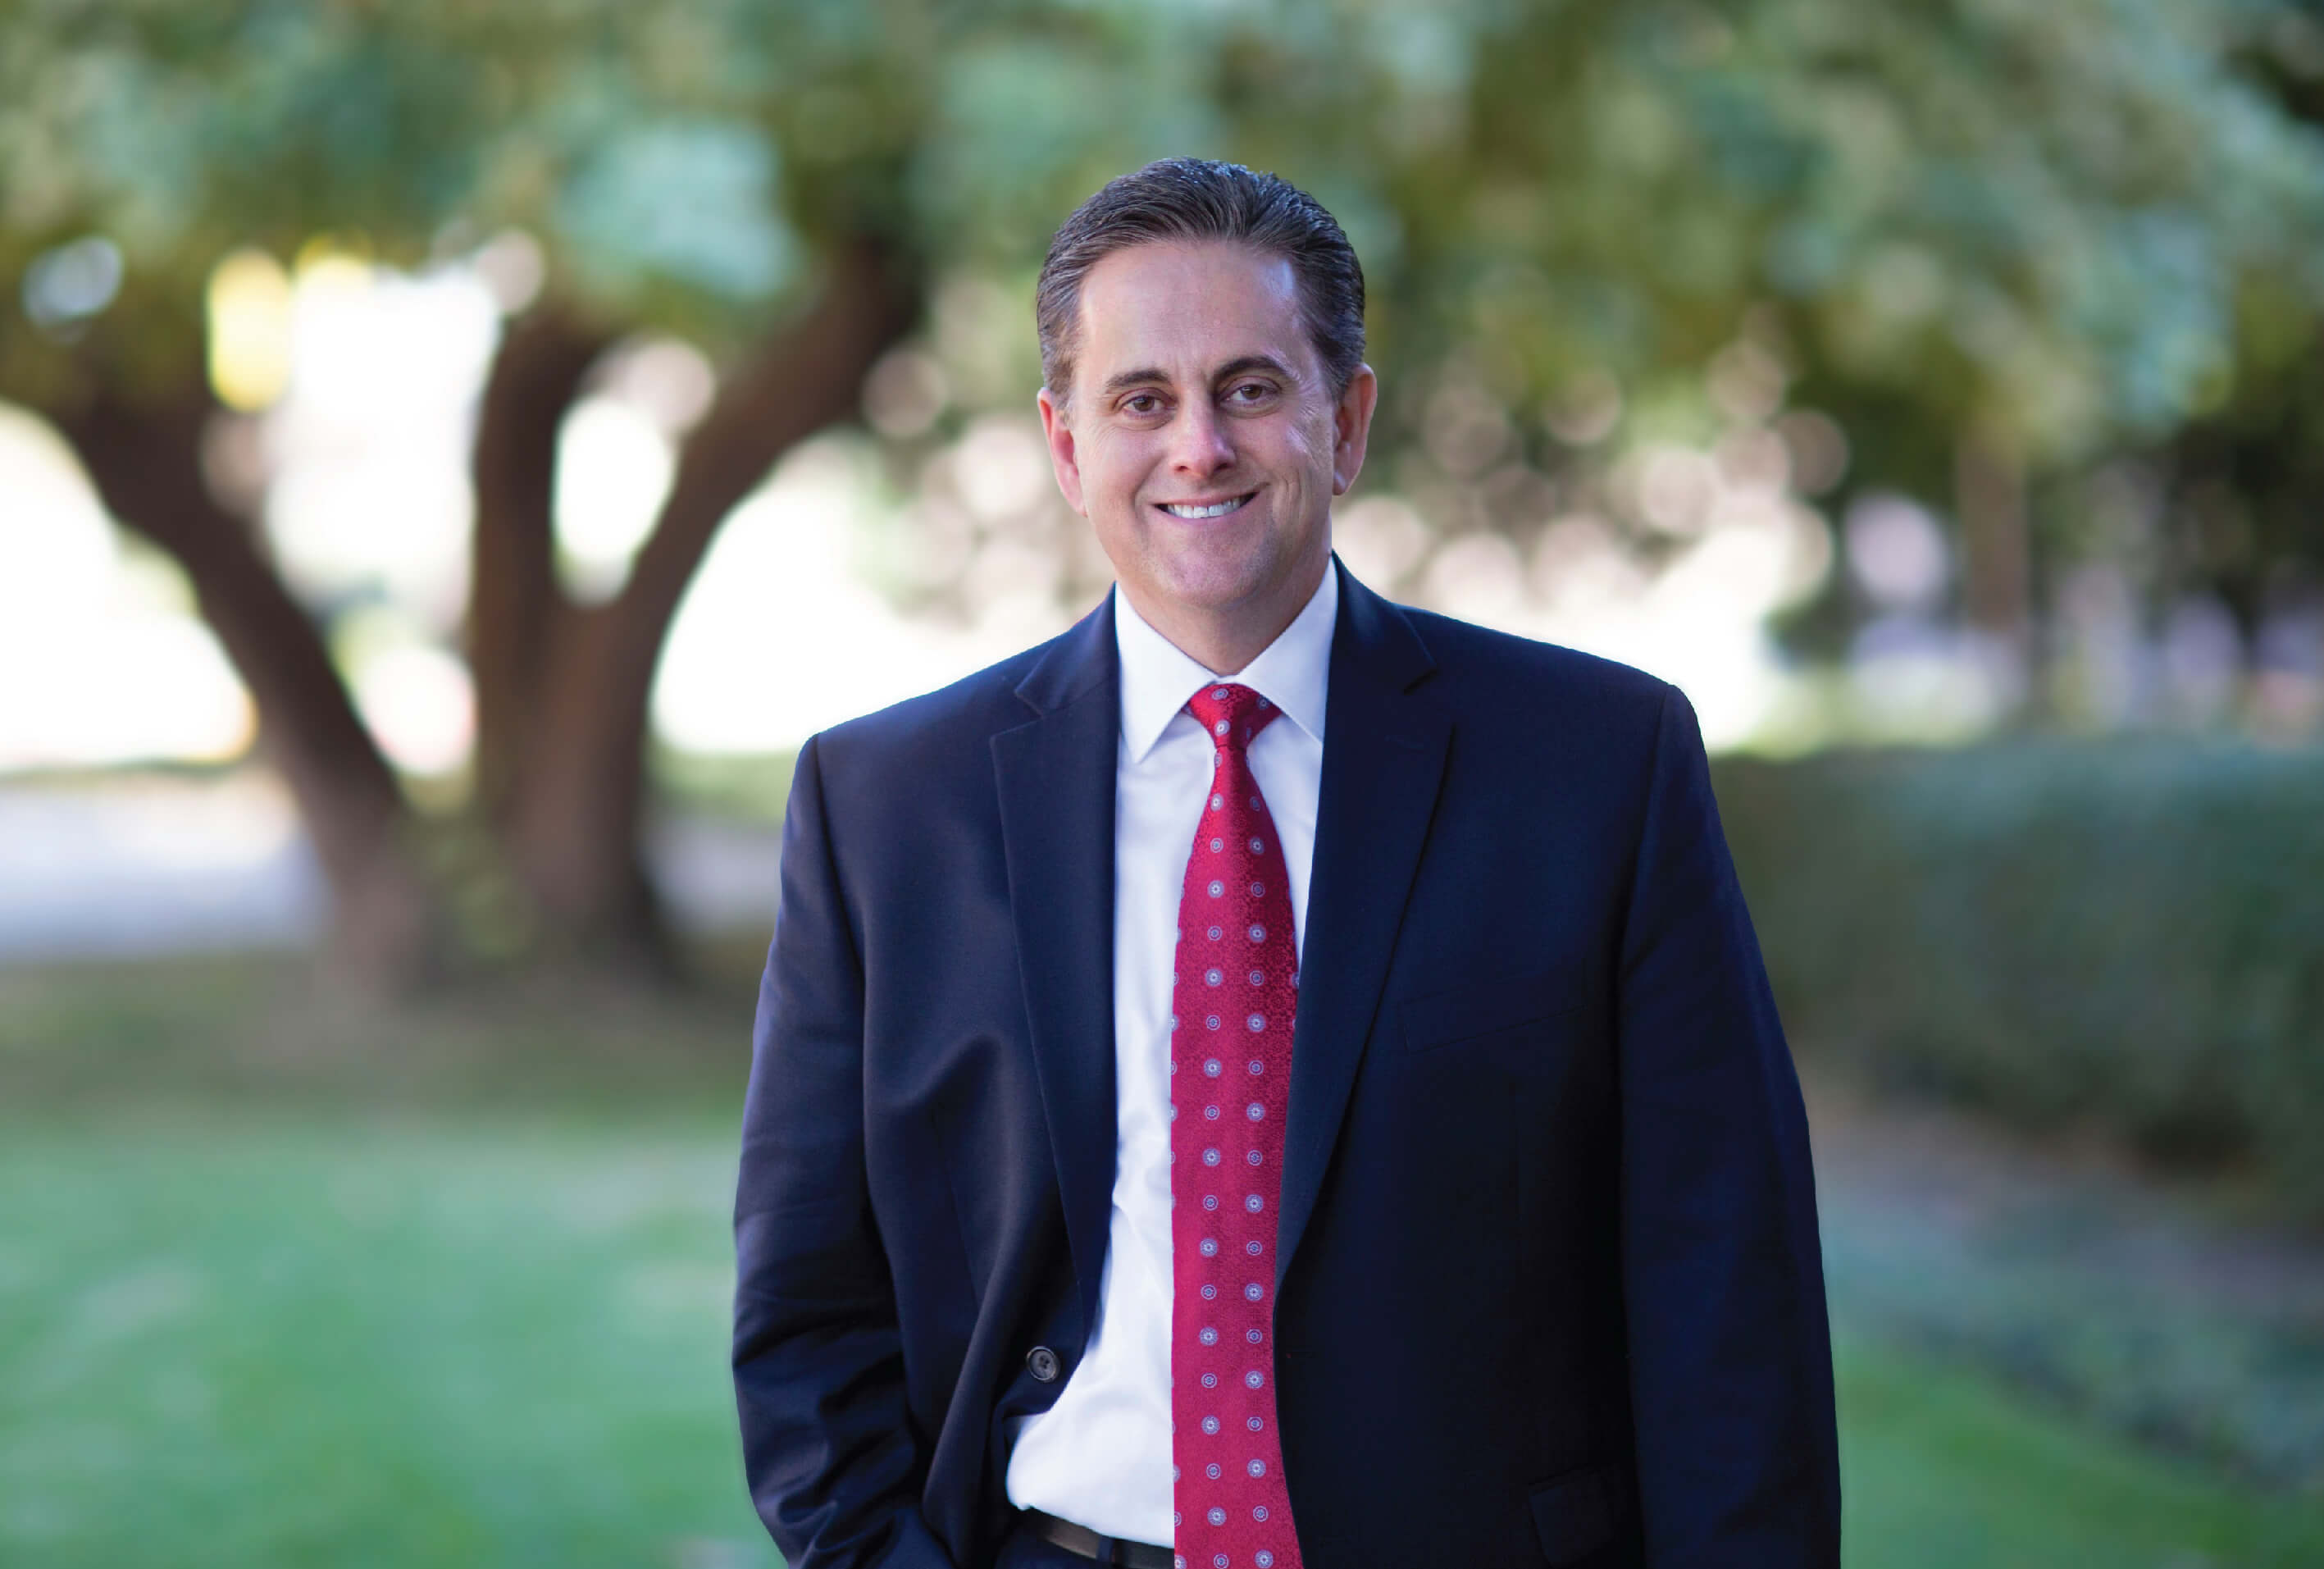 Cal State LA Executive Vice President and Chief Operating Officer Jose A. Gomez